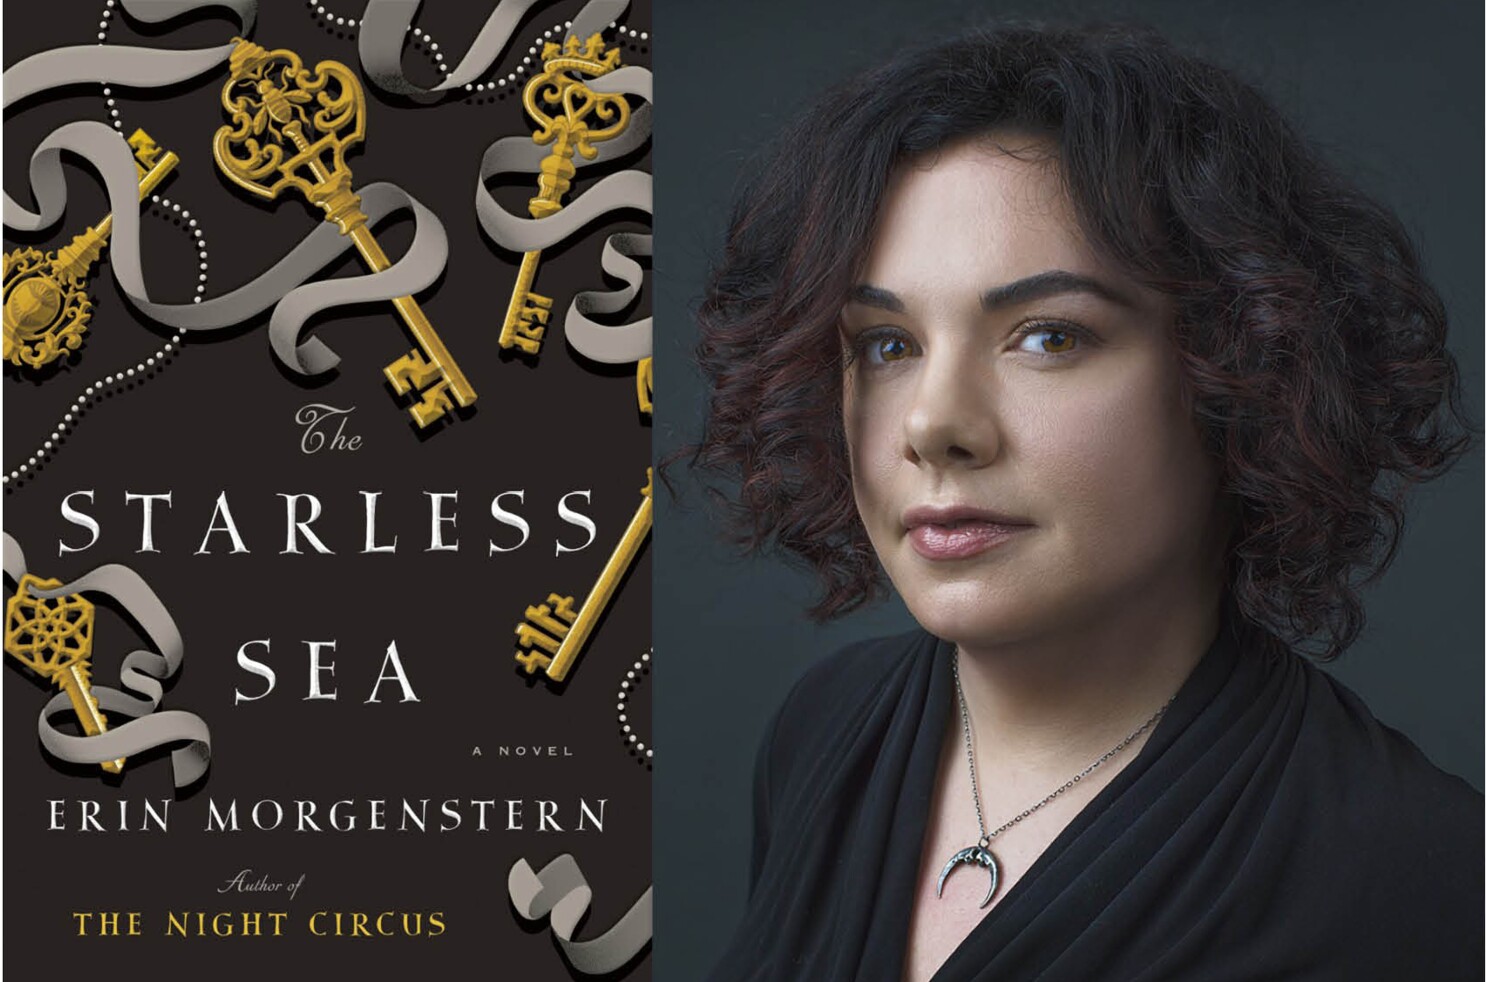 Following Hit Debut Erin Morgenstern Takes Voyage To Starless Sea The San Diego Union Tribune